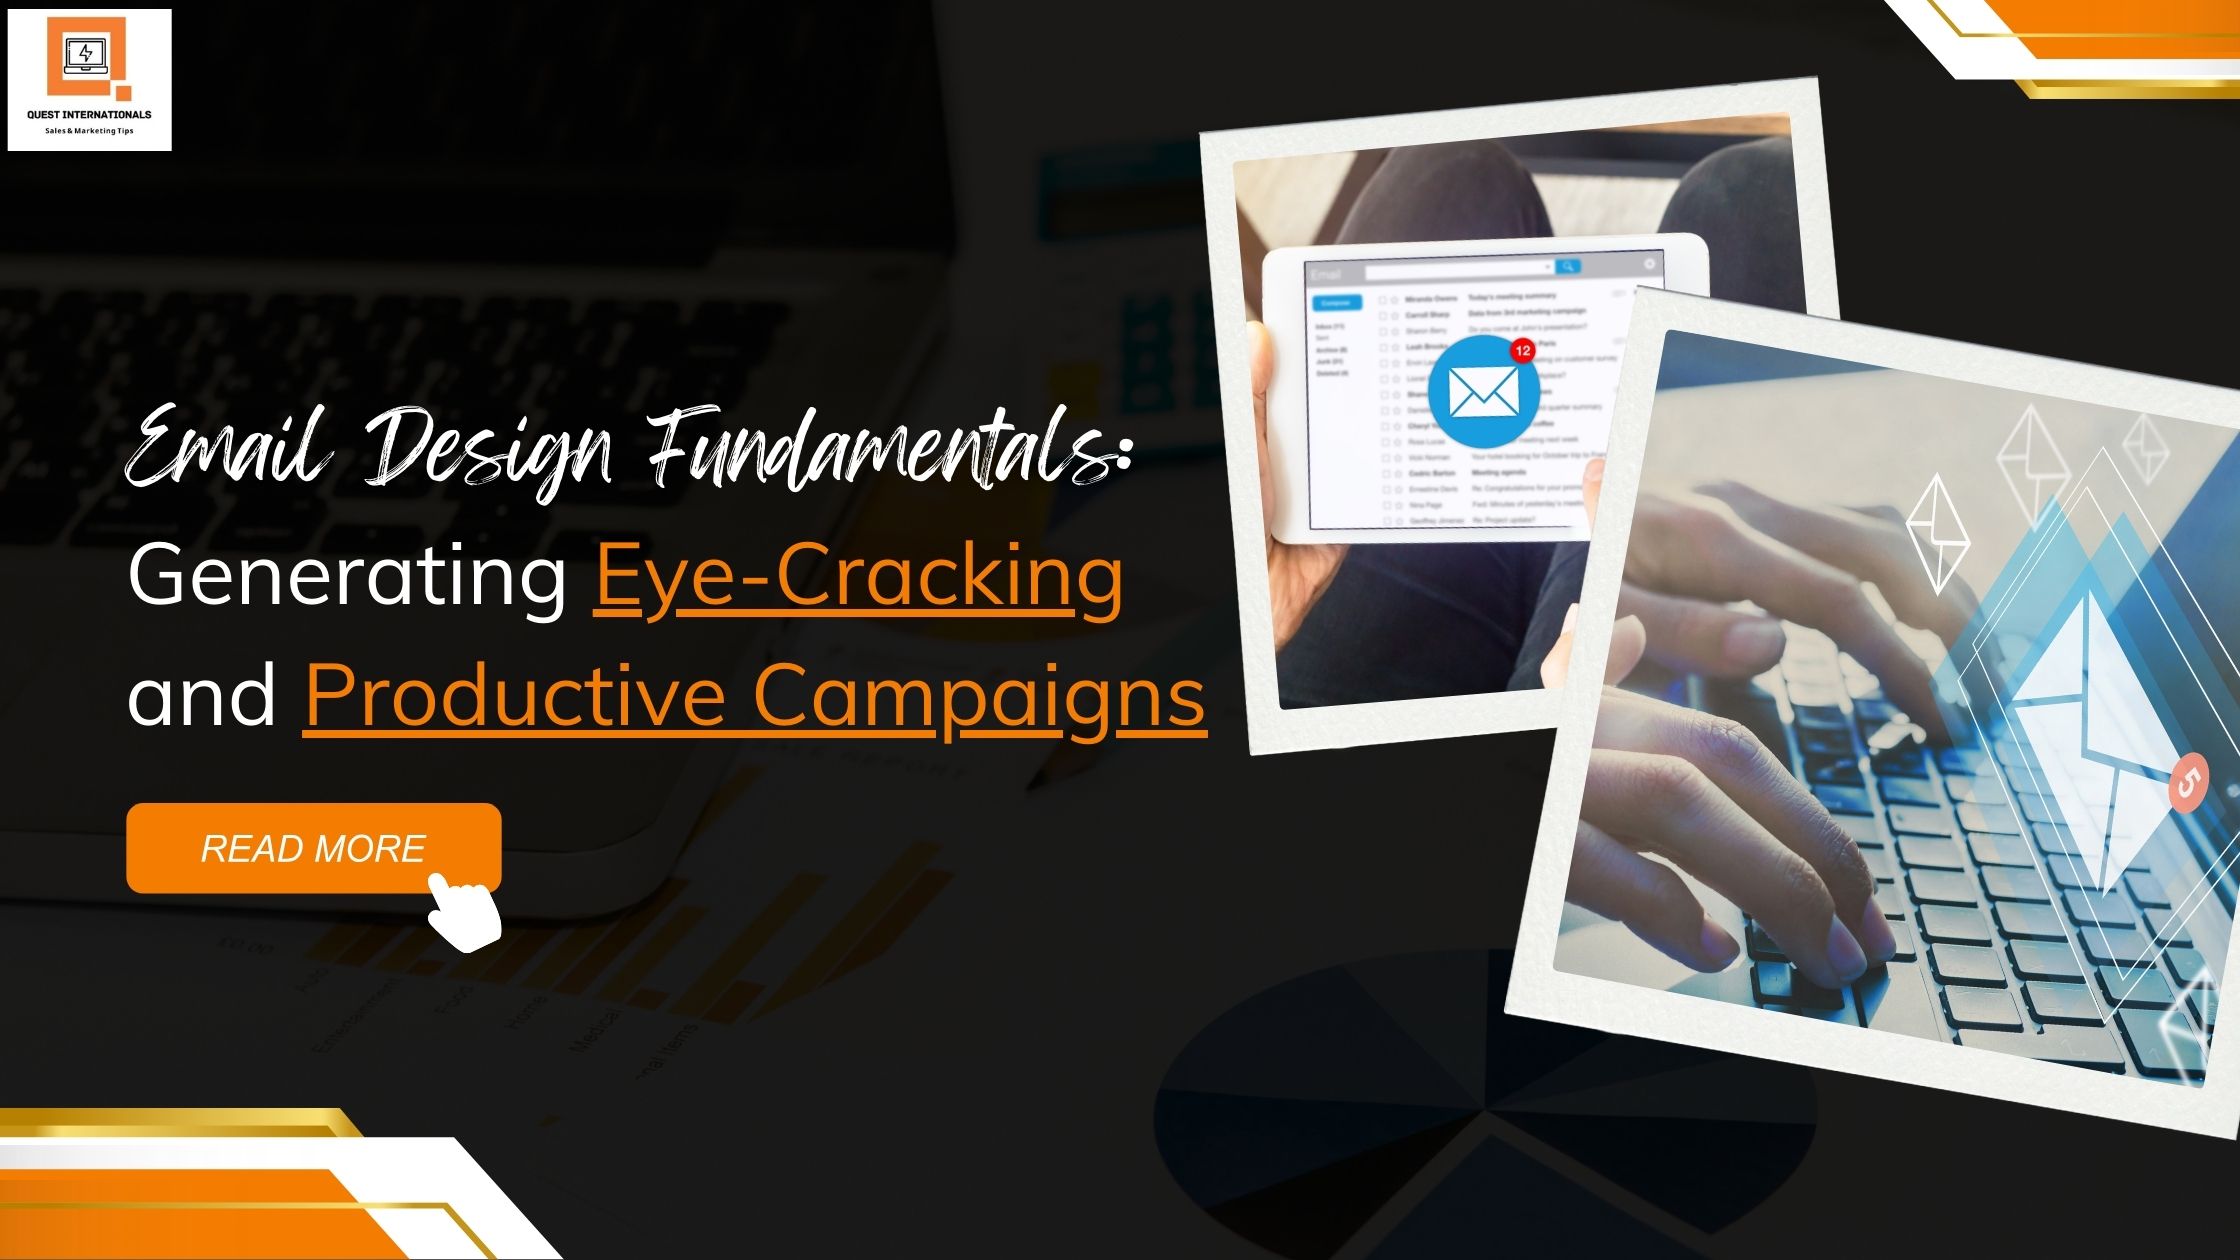 You are currently viewing Email Design Fundamentals: Generating Eye-Cracking and Productive Campaigns